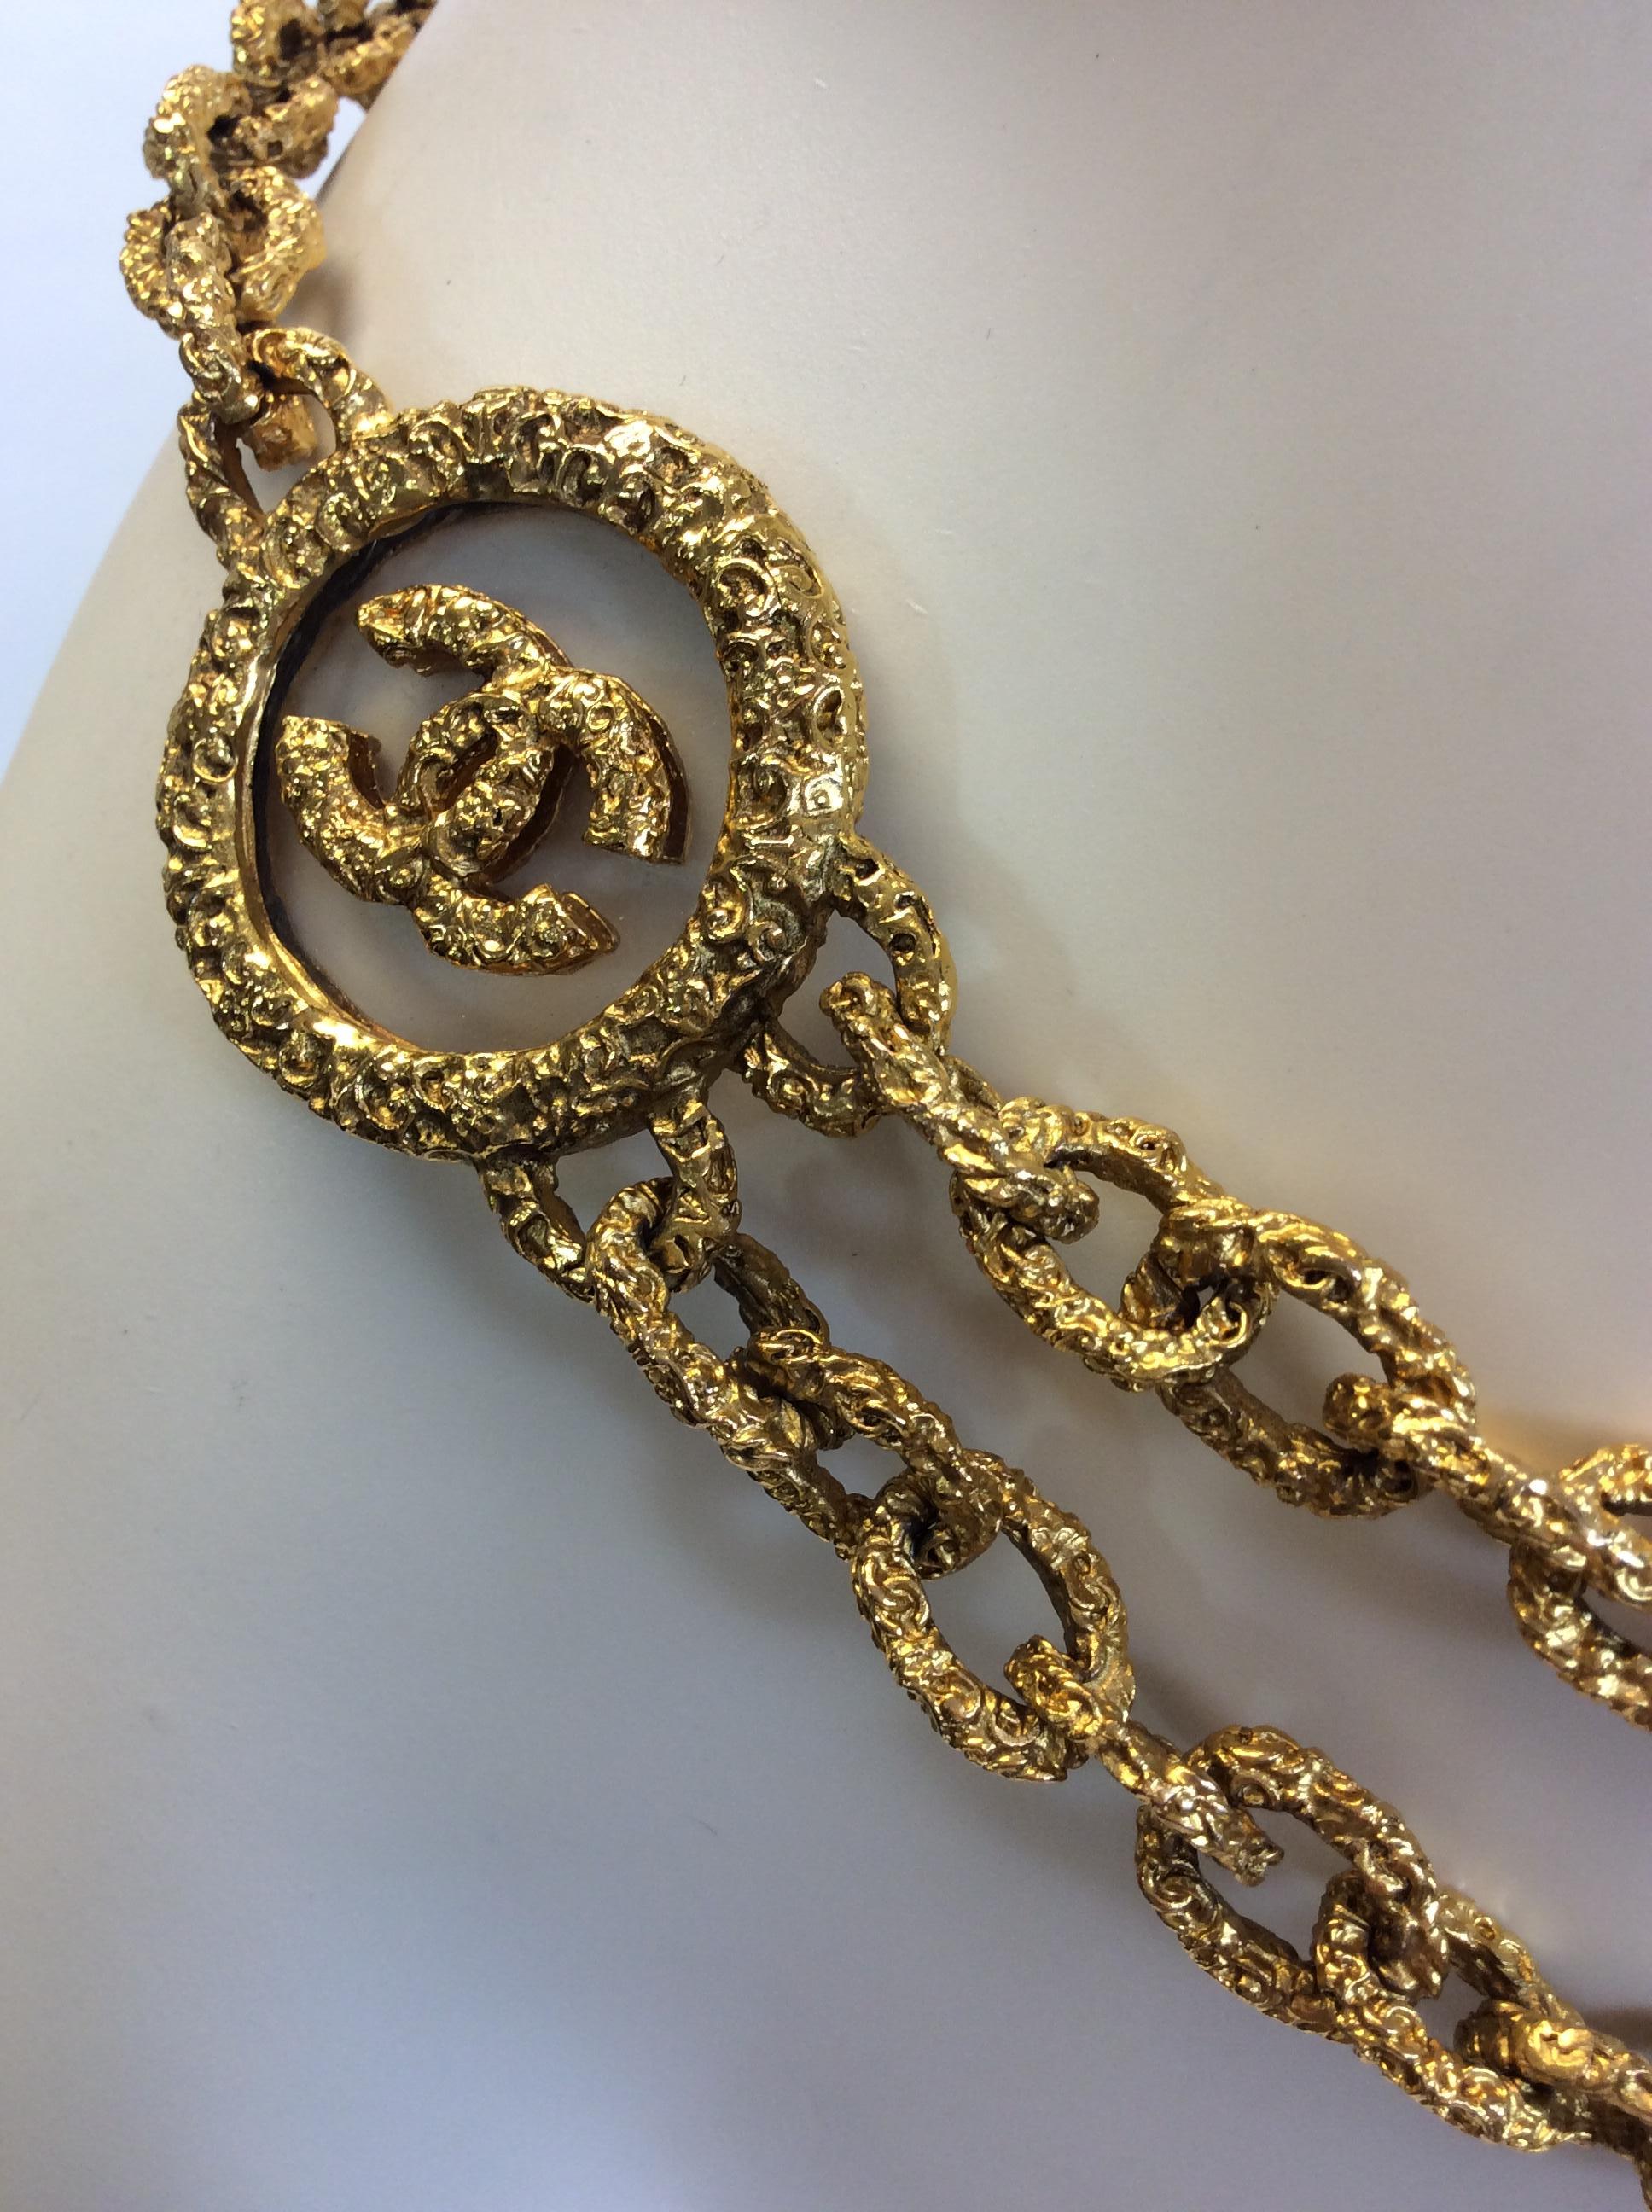 Chanel Gold Tone Belt
$1499
Made in France
Can also be worn as a necklace
36